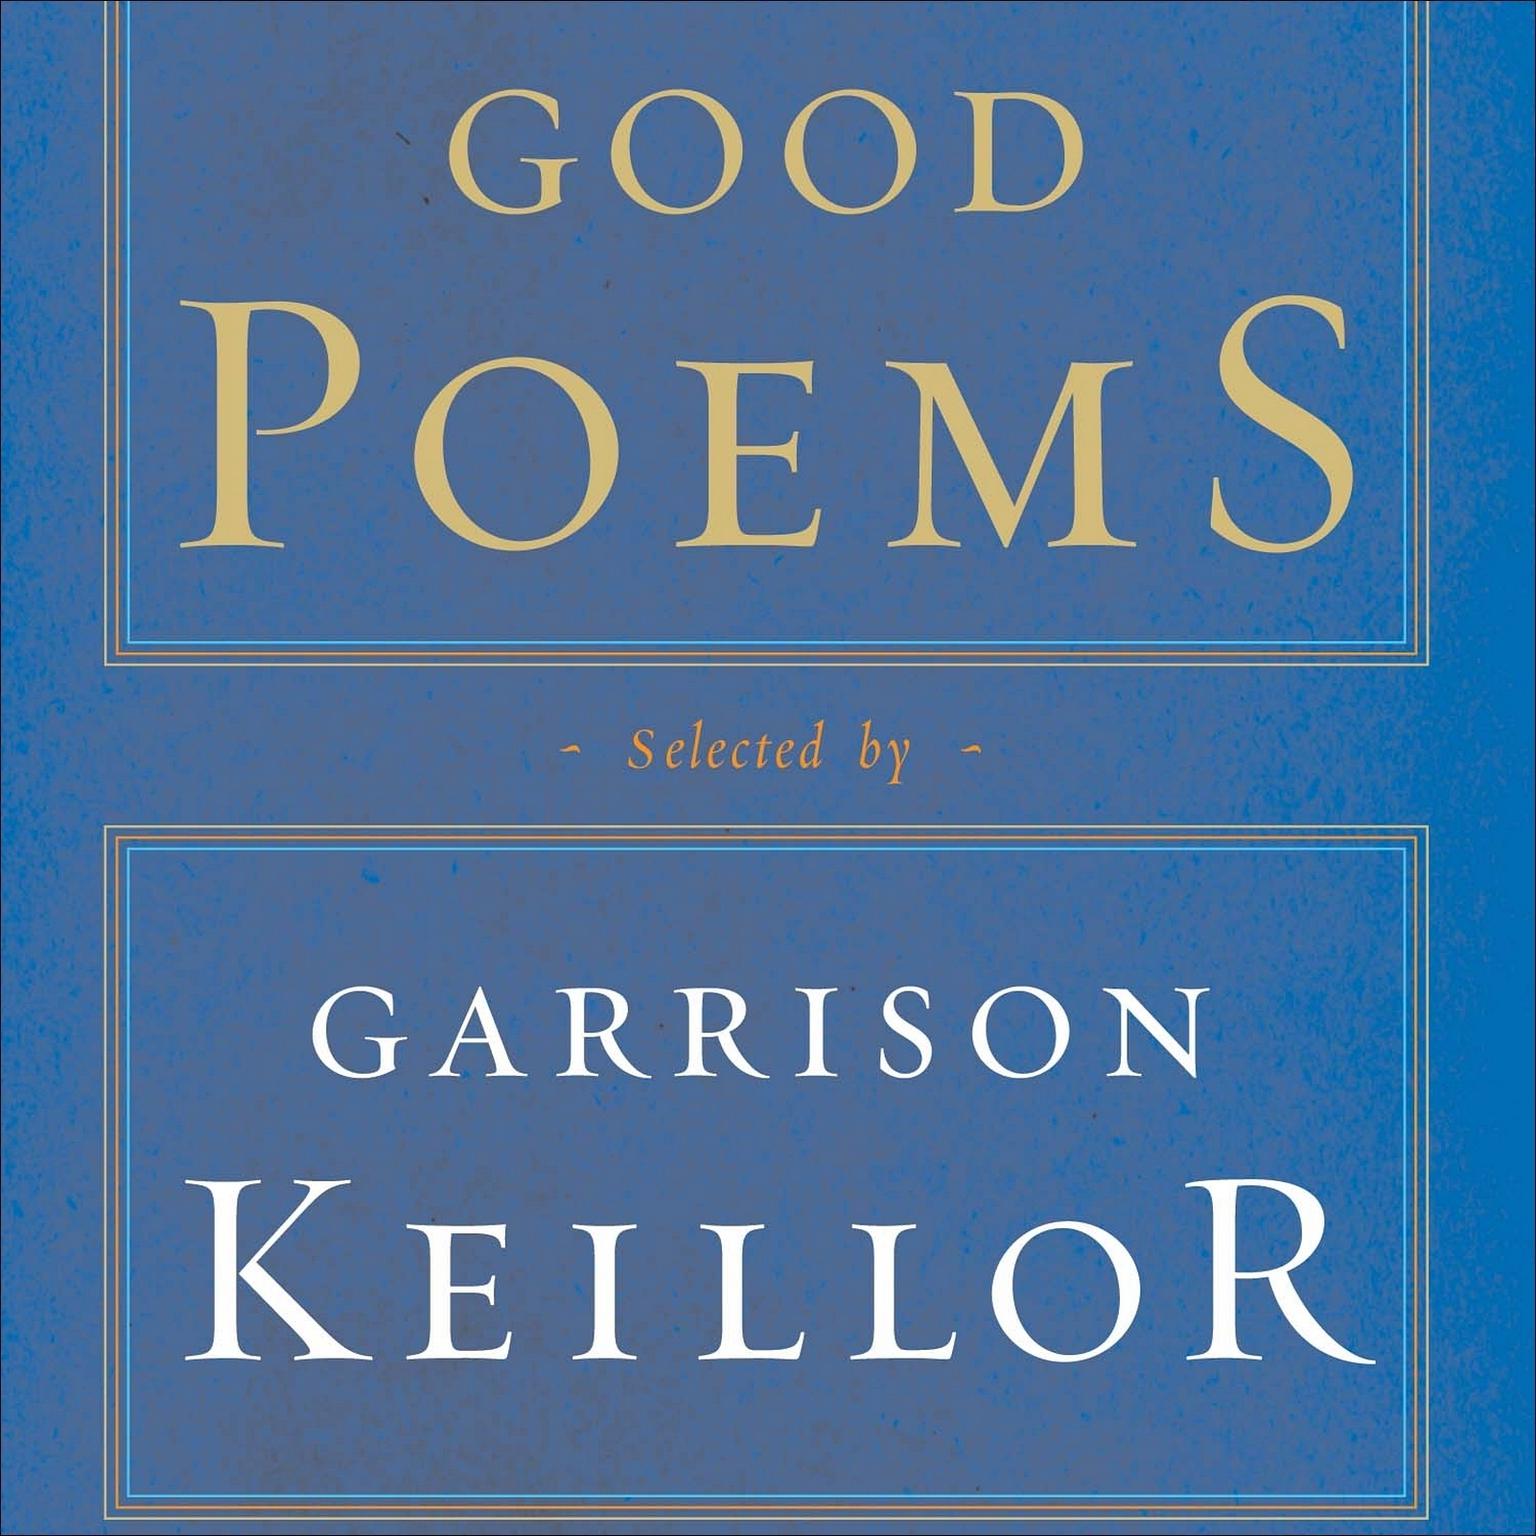 Good Poems (Abridged): Selected and Introduced by Garrison Keillor Audiobook, by Various 